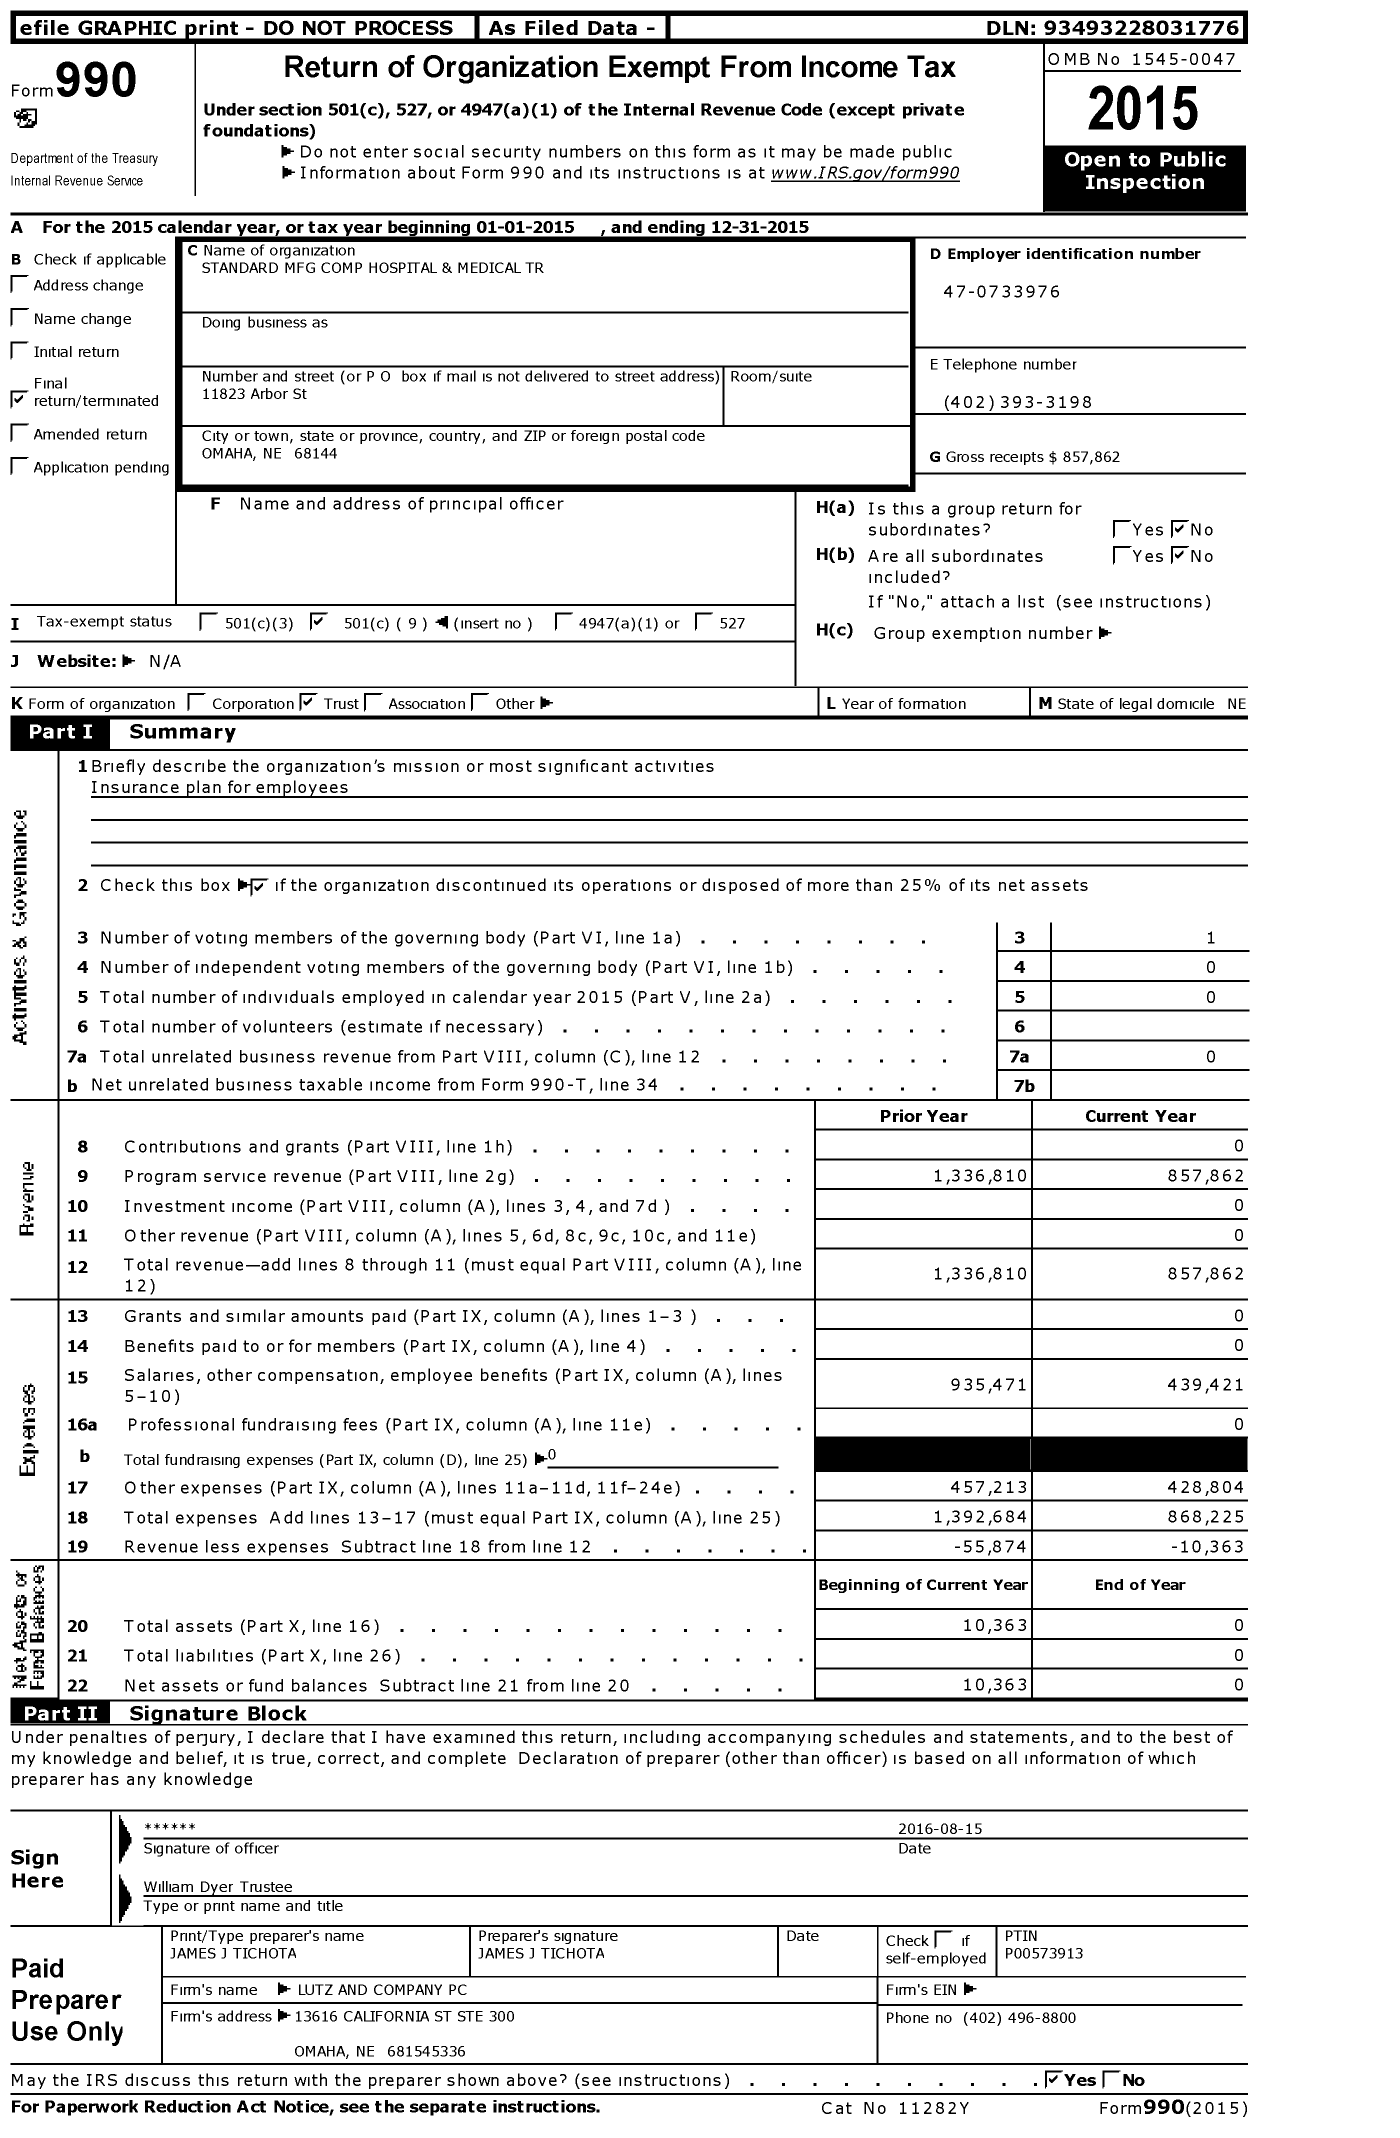 Image of first page of 2015 Form 990O for Standard MFG Comp Hospital and Medical Trust